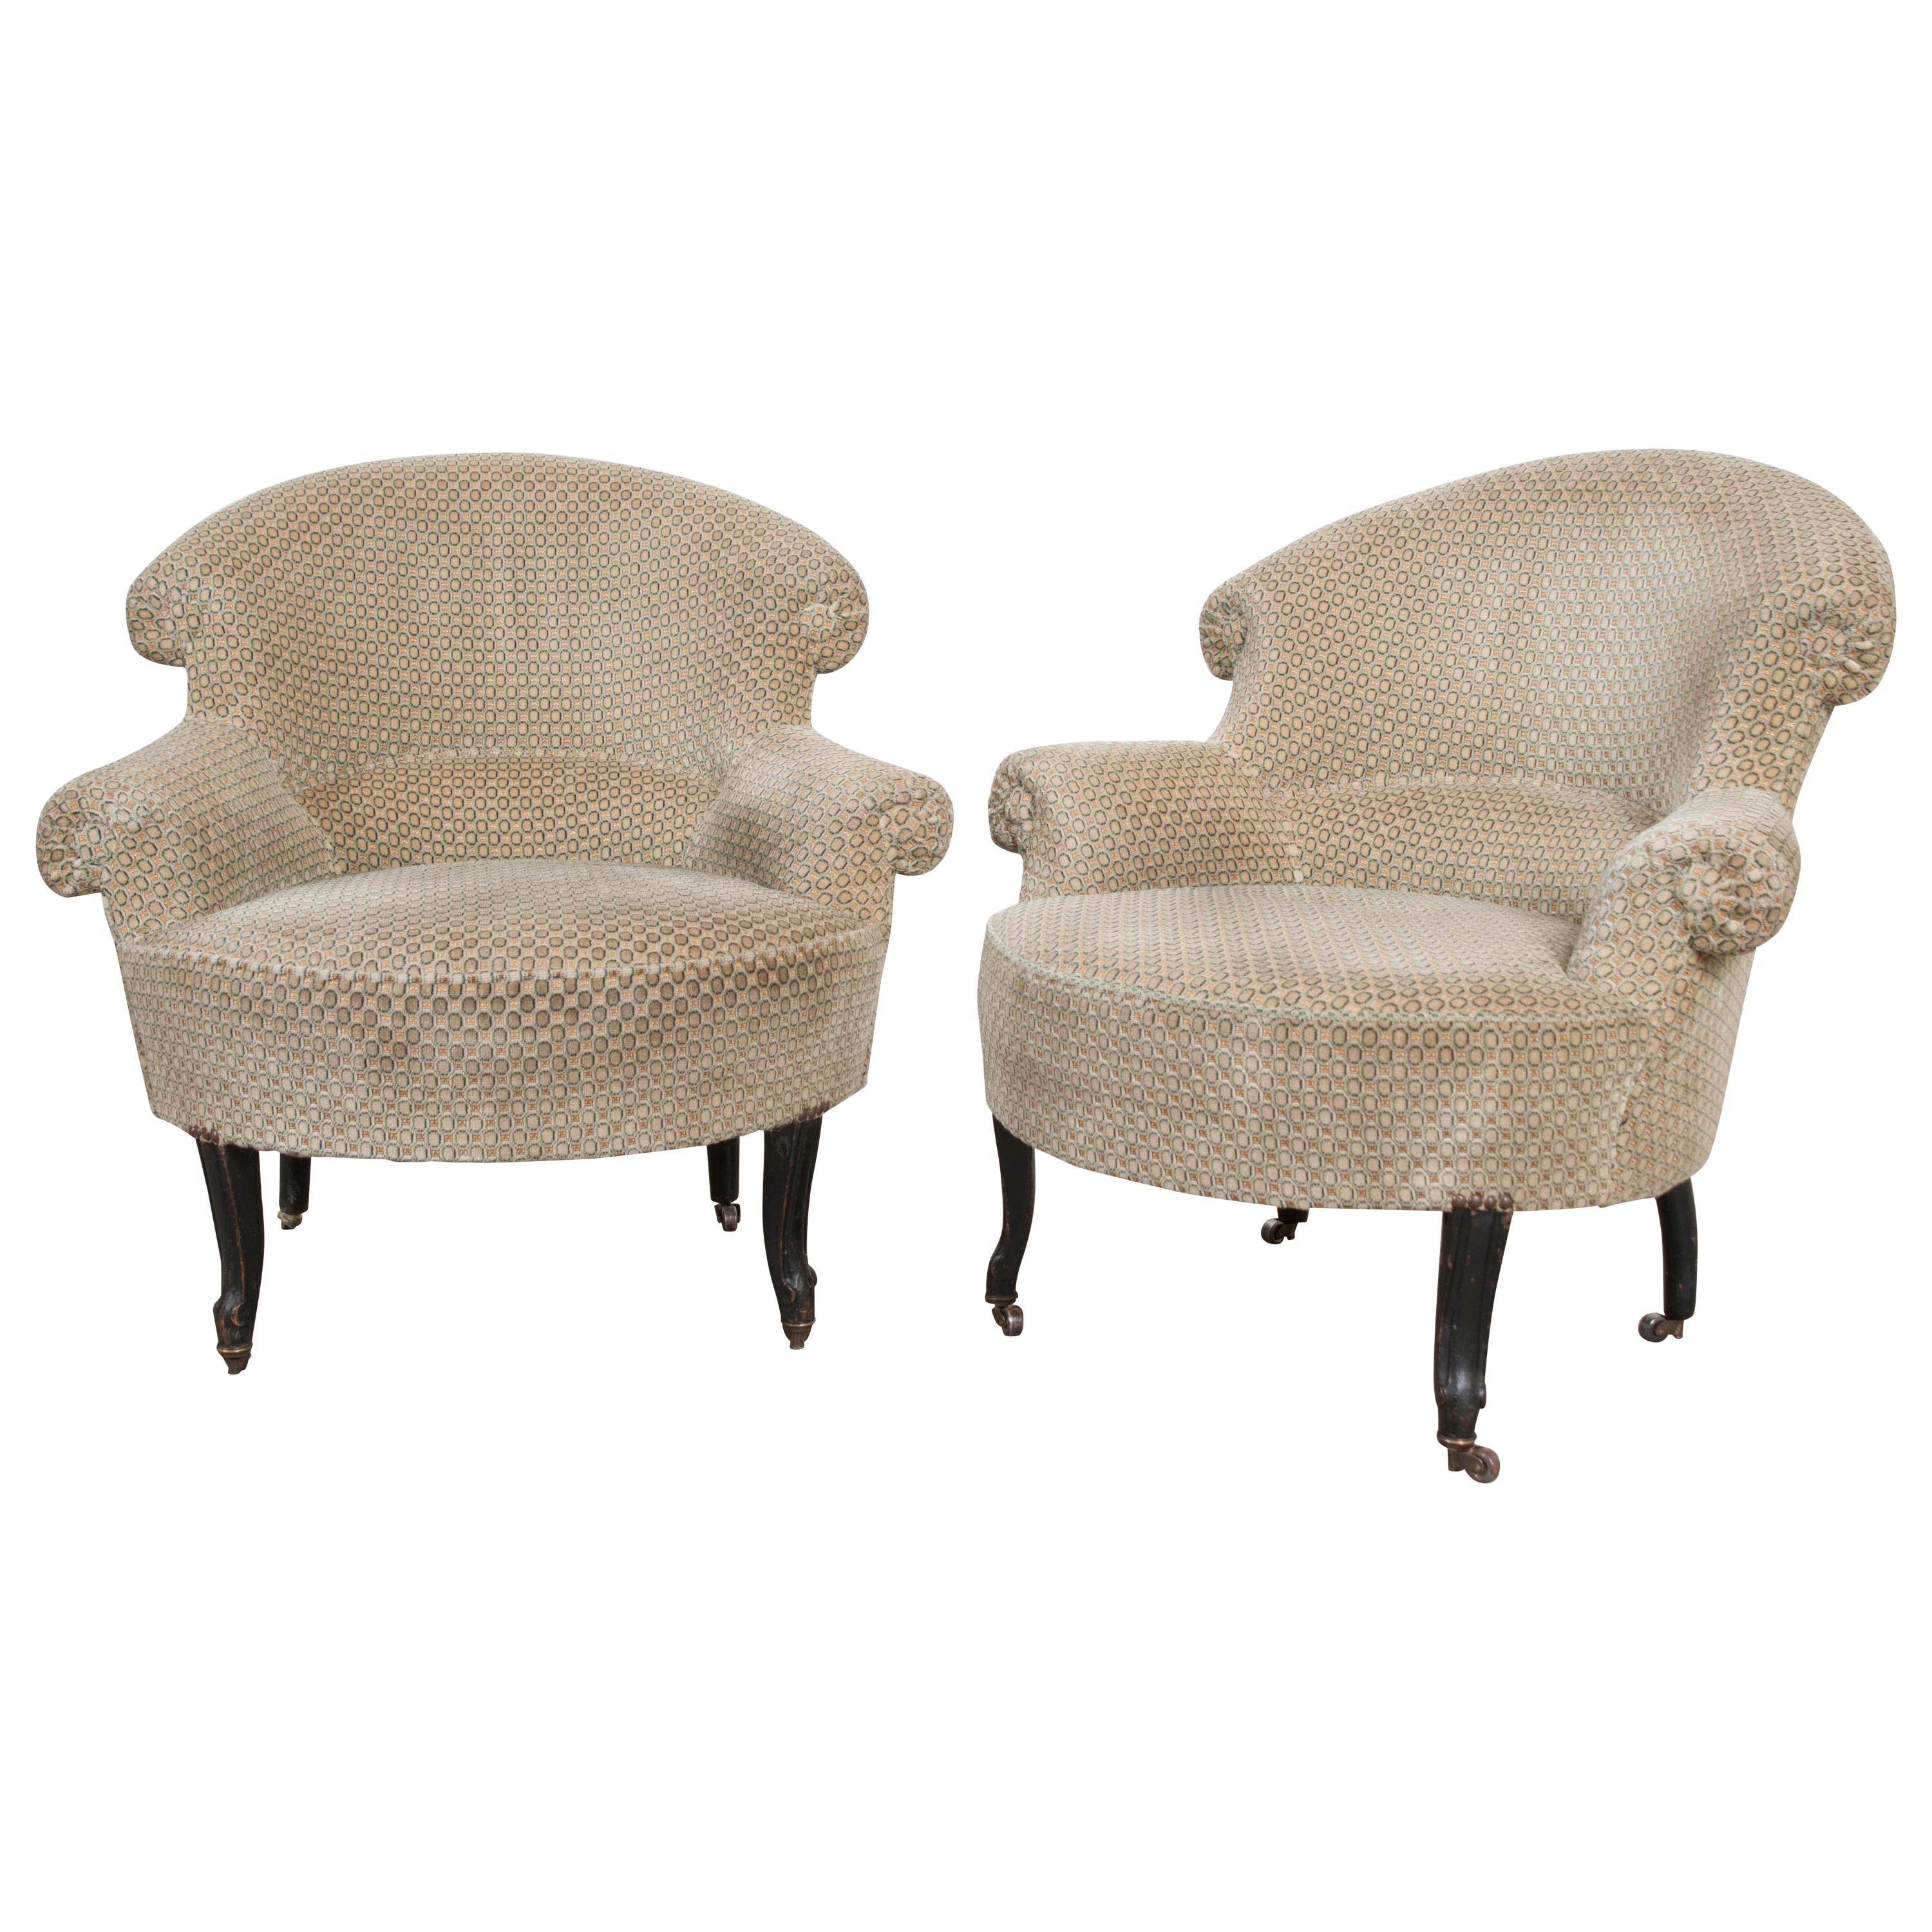 Pair of 19th Century English Upholstered Tub Chairs